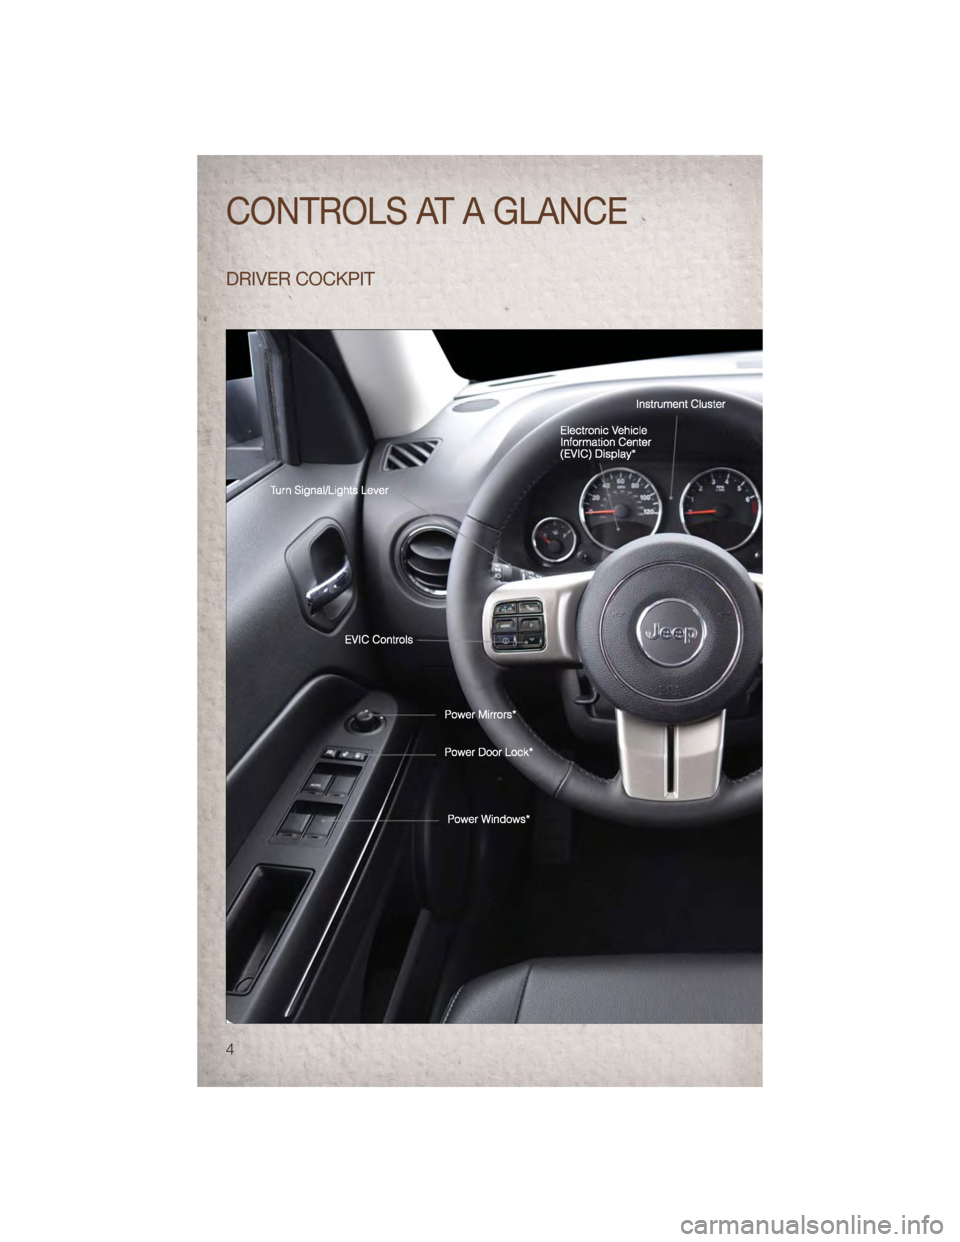 JEEP COMPASS 2011 1.G User Guide DRIVER COCKPIT
CONTROLS AT A GLANCE
4 